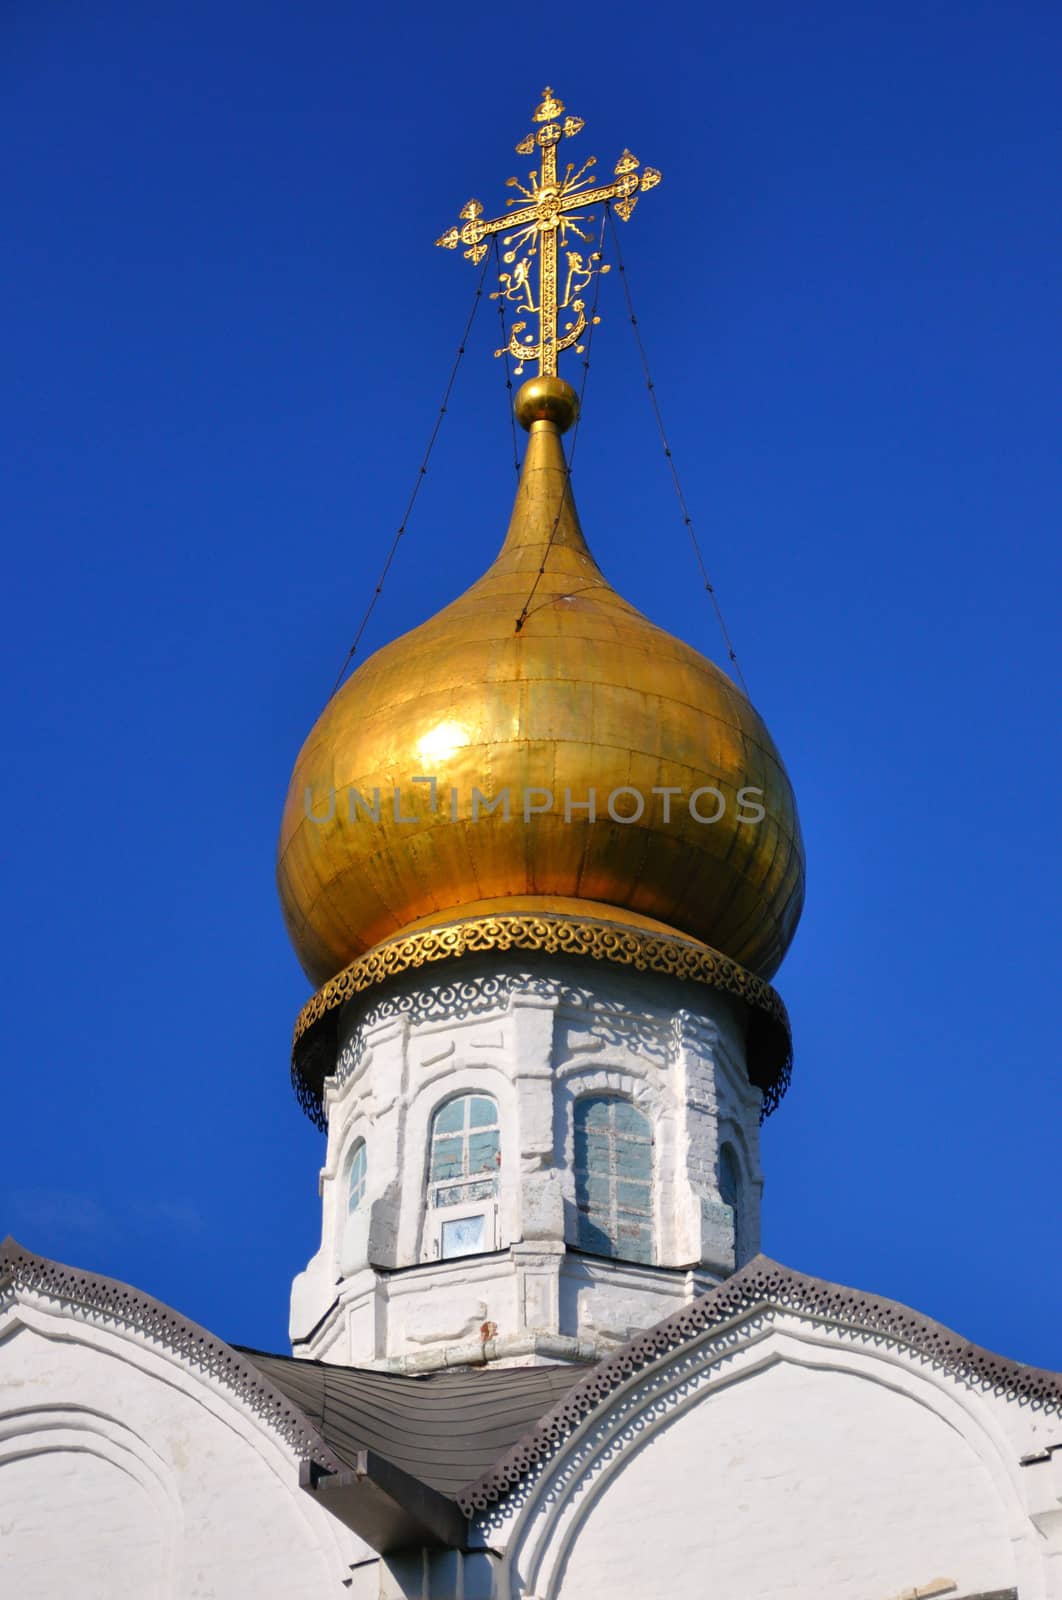 White orthodox church with a golden dome, Sergiev Posad, Moscow  by Eagle2308